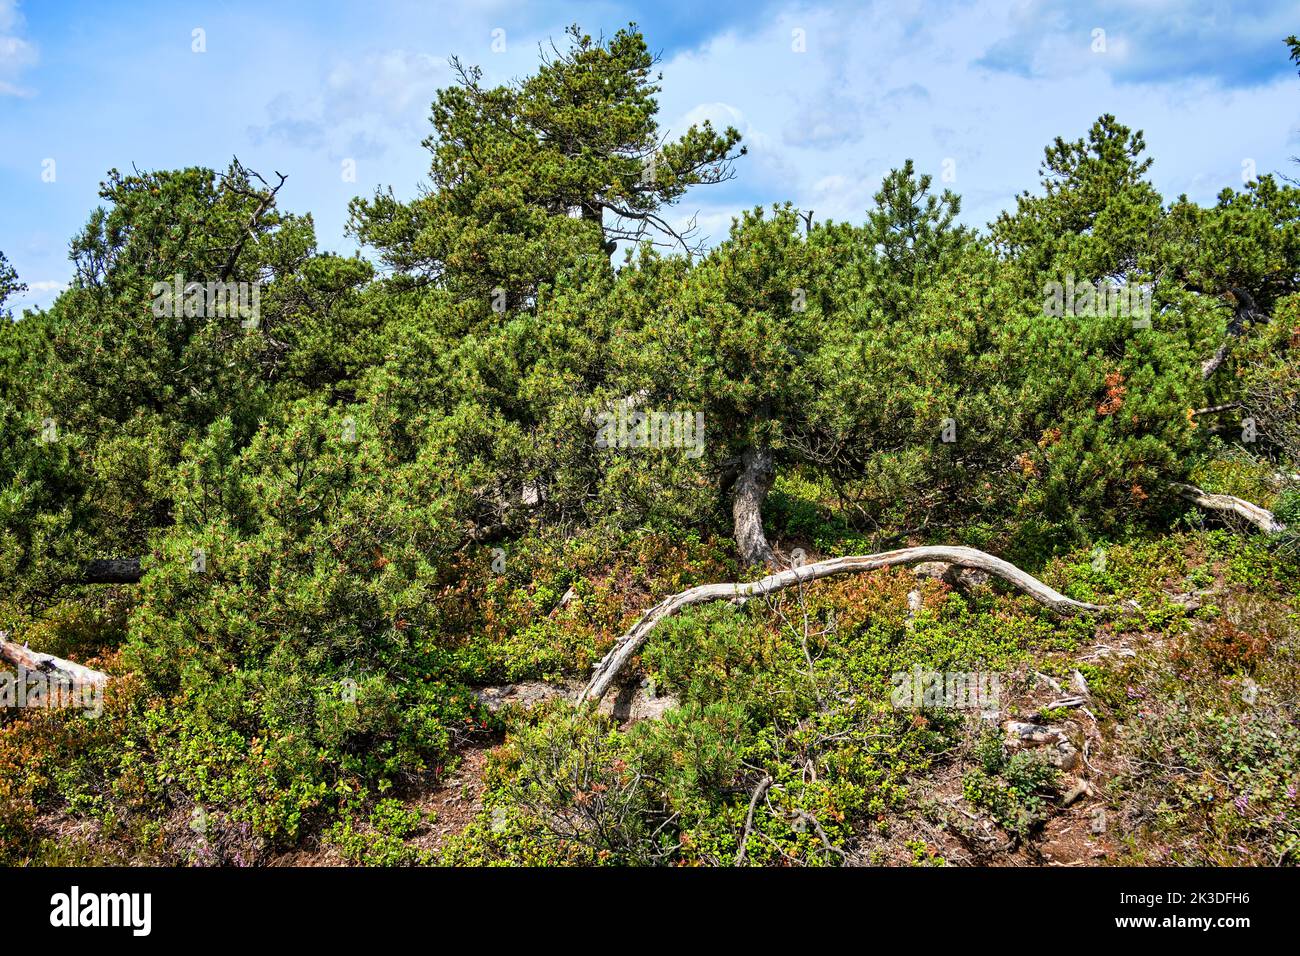 Scenery of crippled coniferous wood and dead trees, nature reserve of the Georgenfeld Raised Bog, Altenberg, Saxony, Germany. Stock Photo